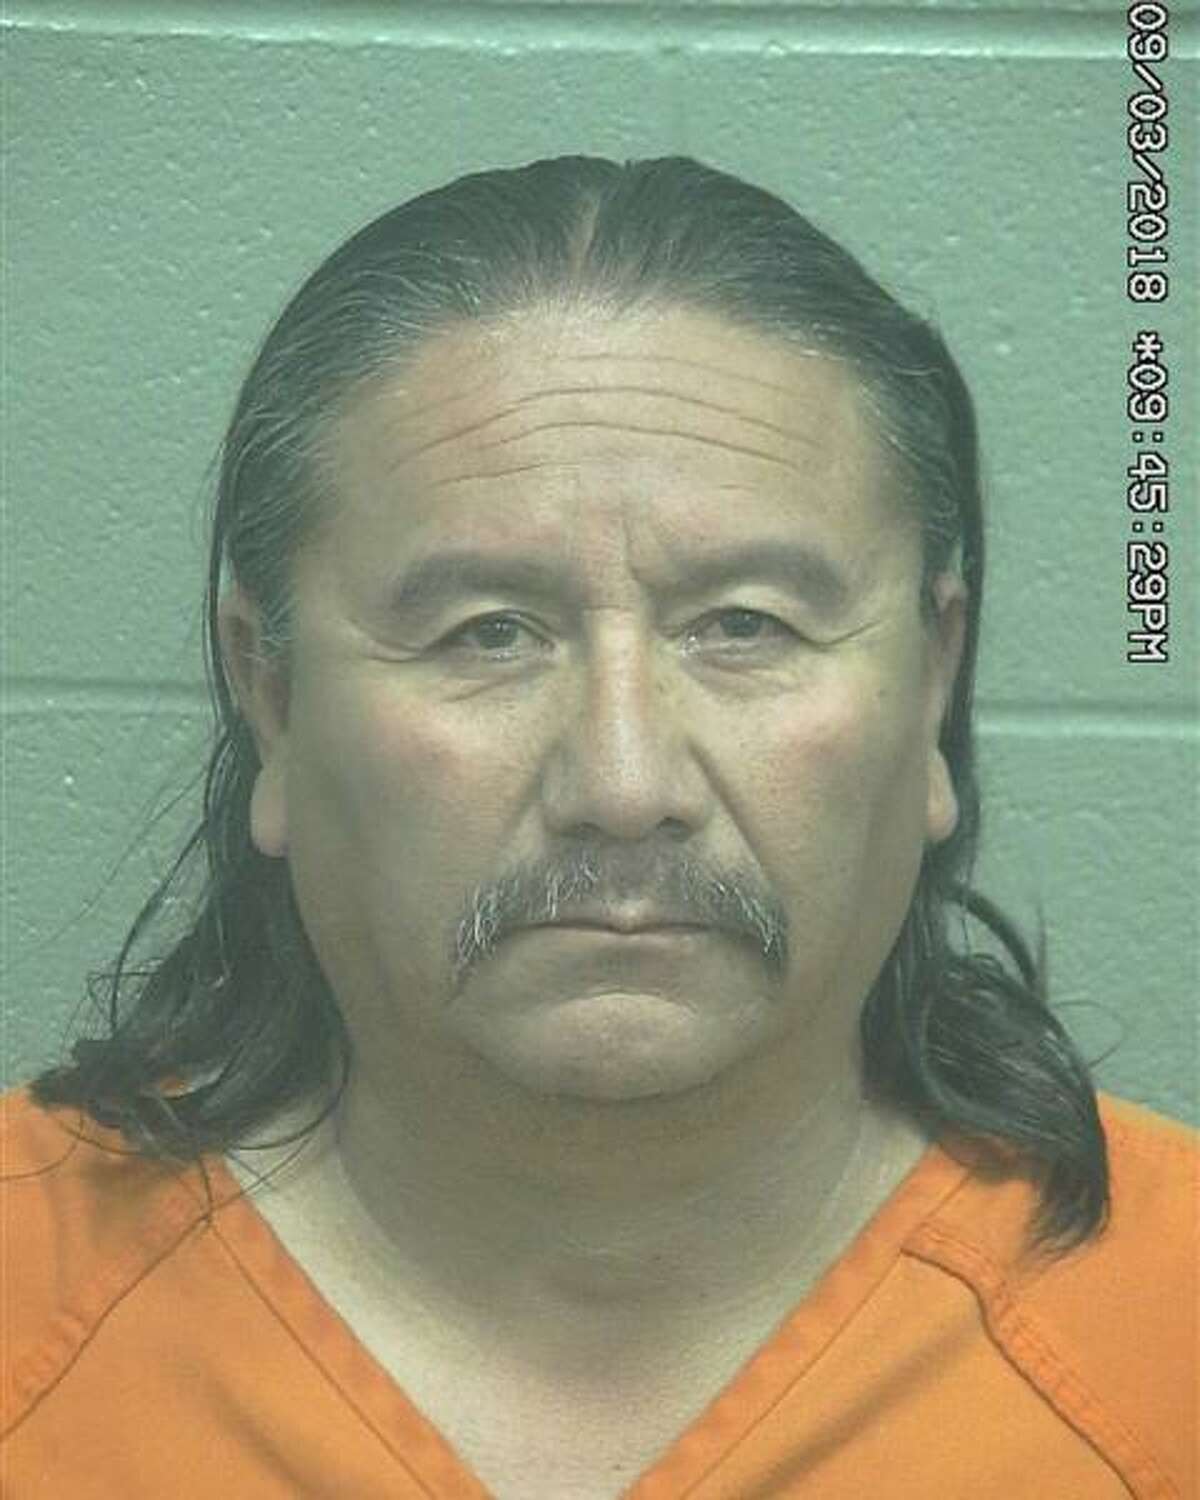 Sixto Medrano Jr., 52, was arrested March 8 after he allegedly recklessly caused injury to a woman, according to court documents.